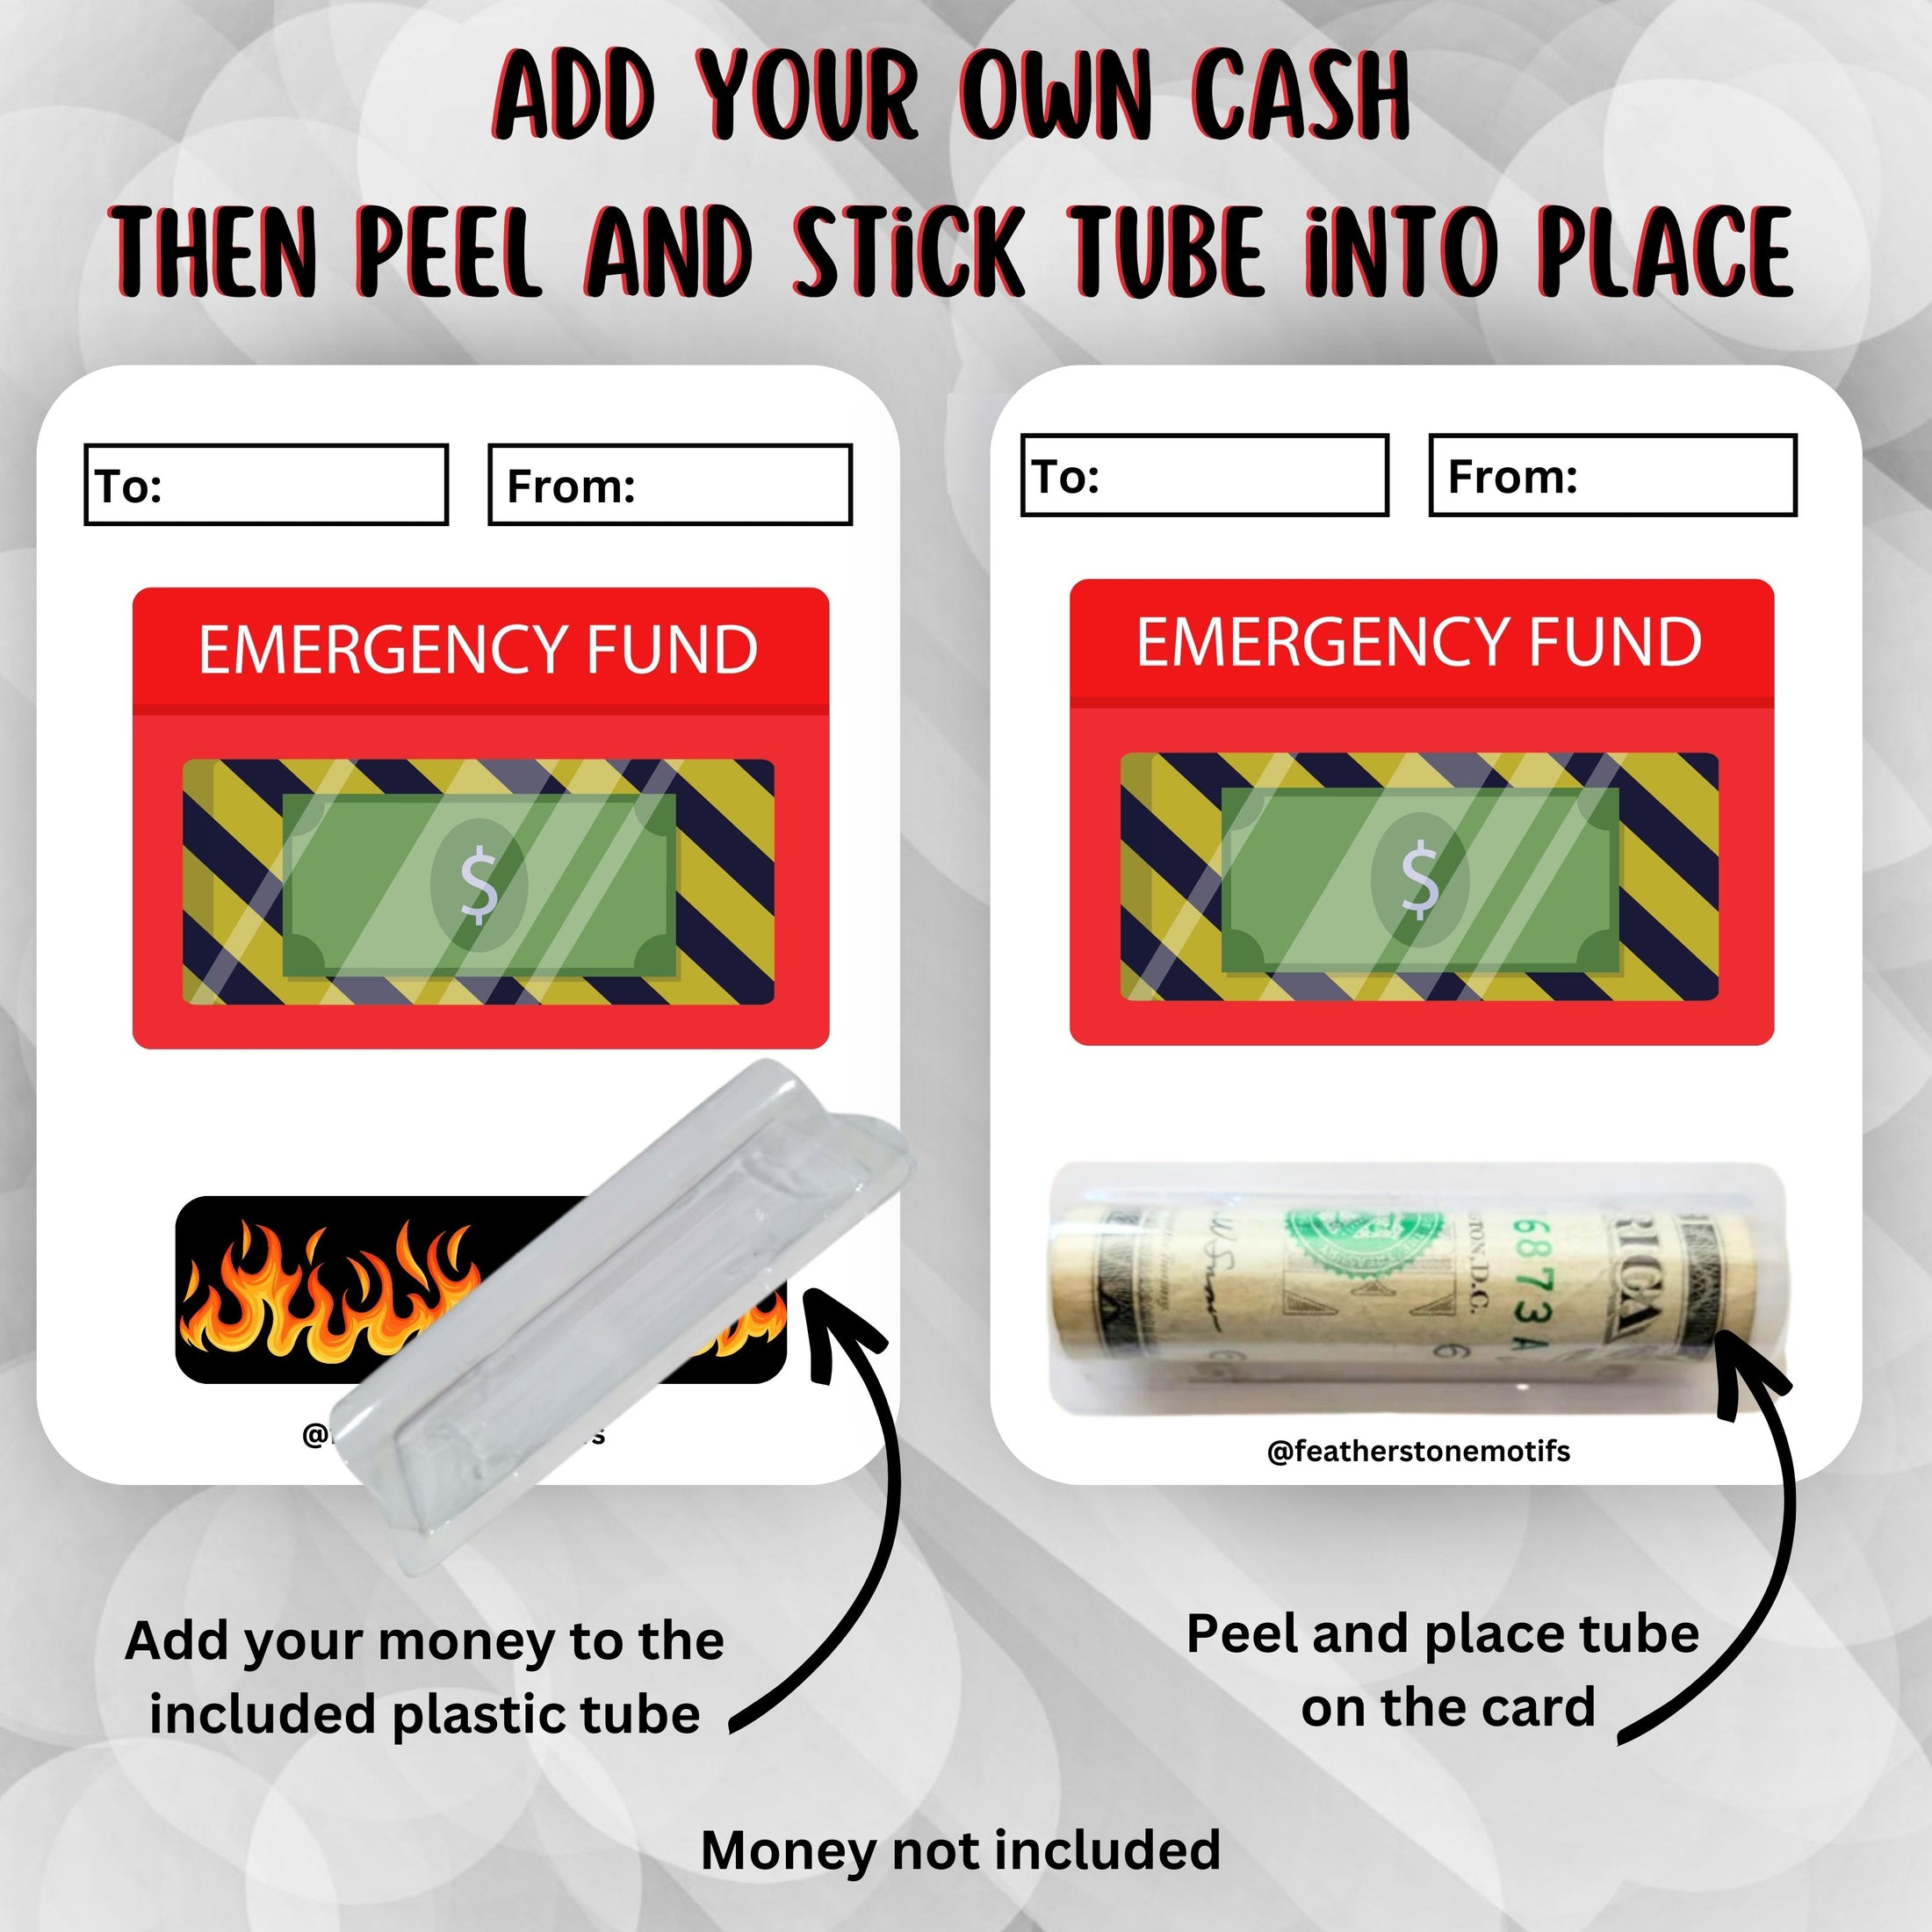 This image shows how to attach the money tube  to the Emergency Funds  money card.